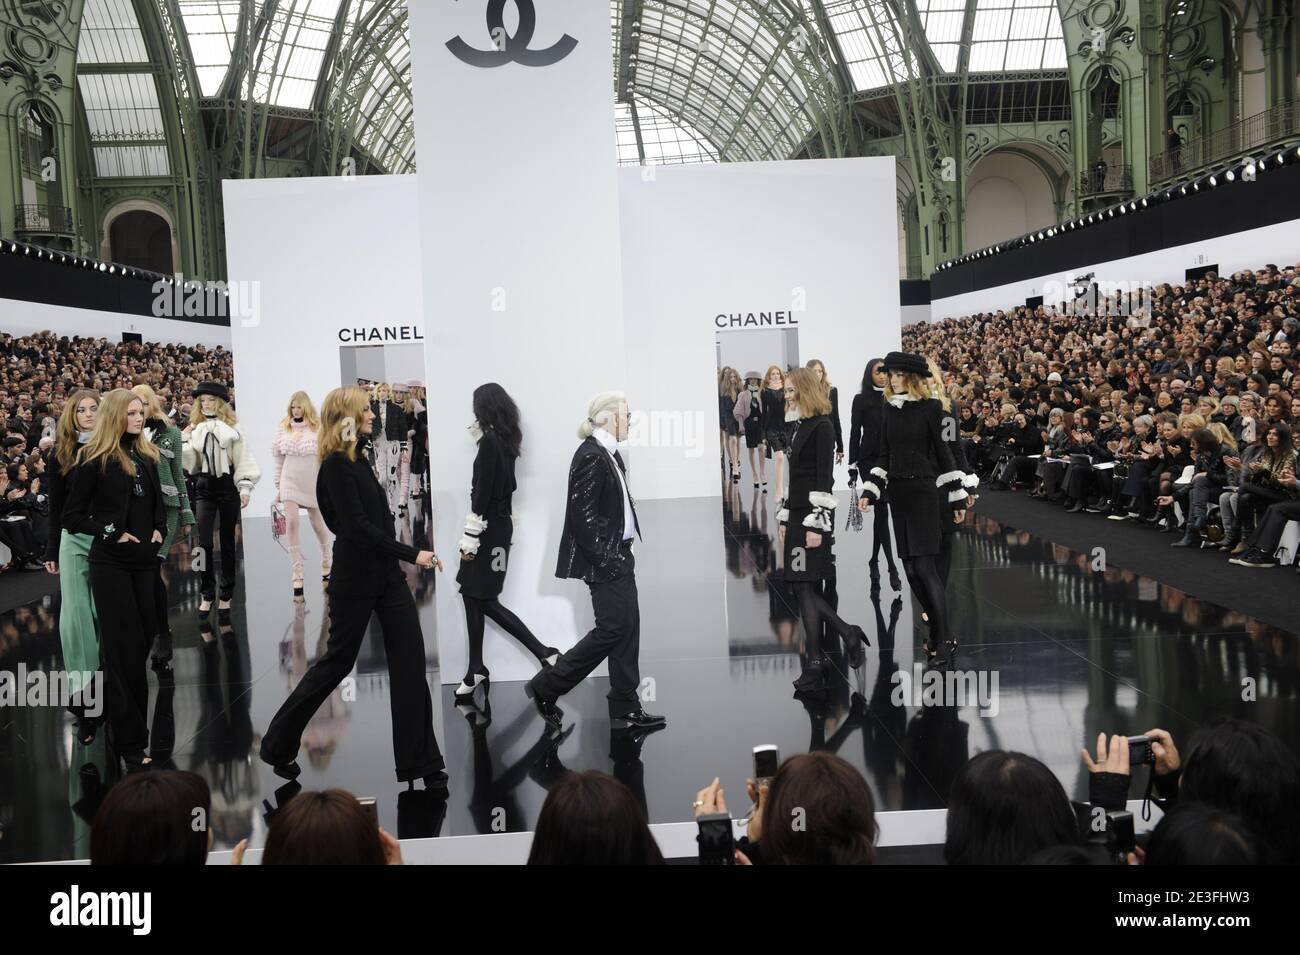 Designer Karl Lagerfeld appears during the Chanel Fall-Winter 2009/2010  ready-to-wear collection show held at the Grand Palais in Paris, France on  March 10, 2009. Photo by Mehdi Taamallah/ABACAPRESS.COM Stock Photo - Alamy